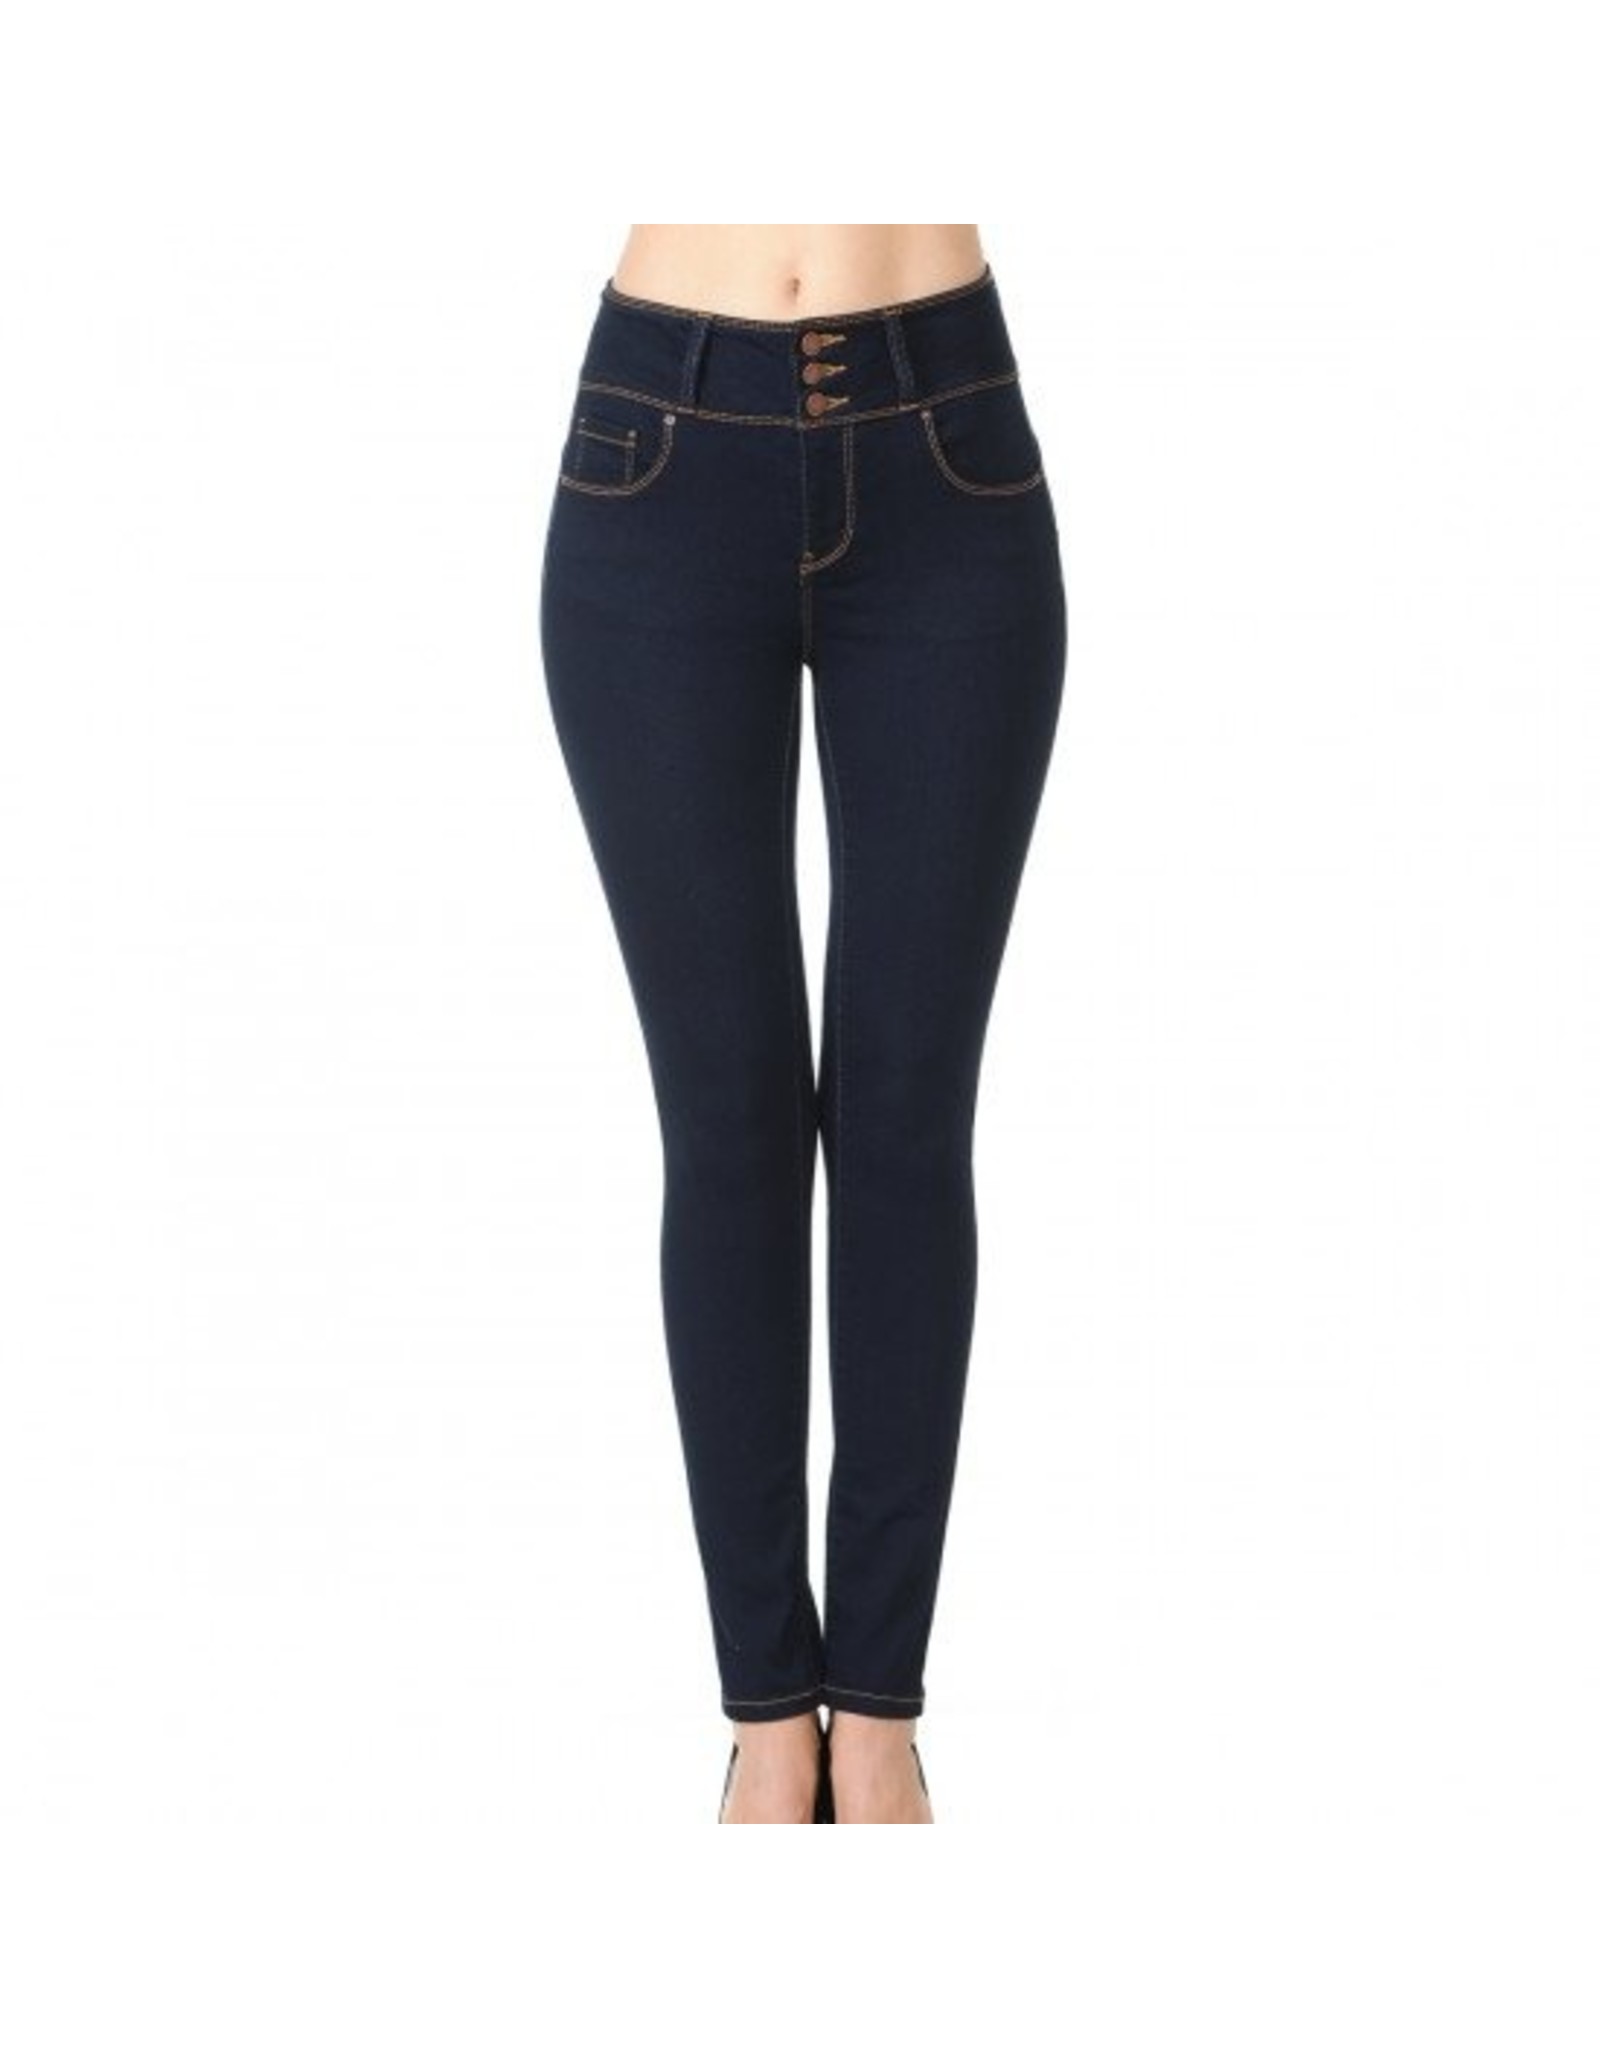 Wax Jeans - High-Rise Push-Up Super Comfy Skinny Jean - 90400